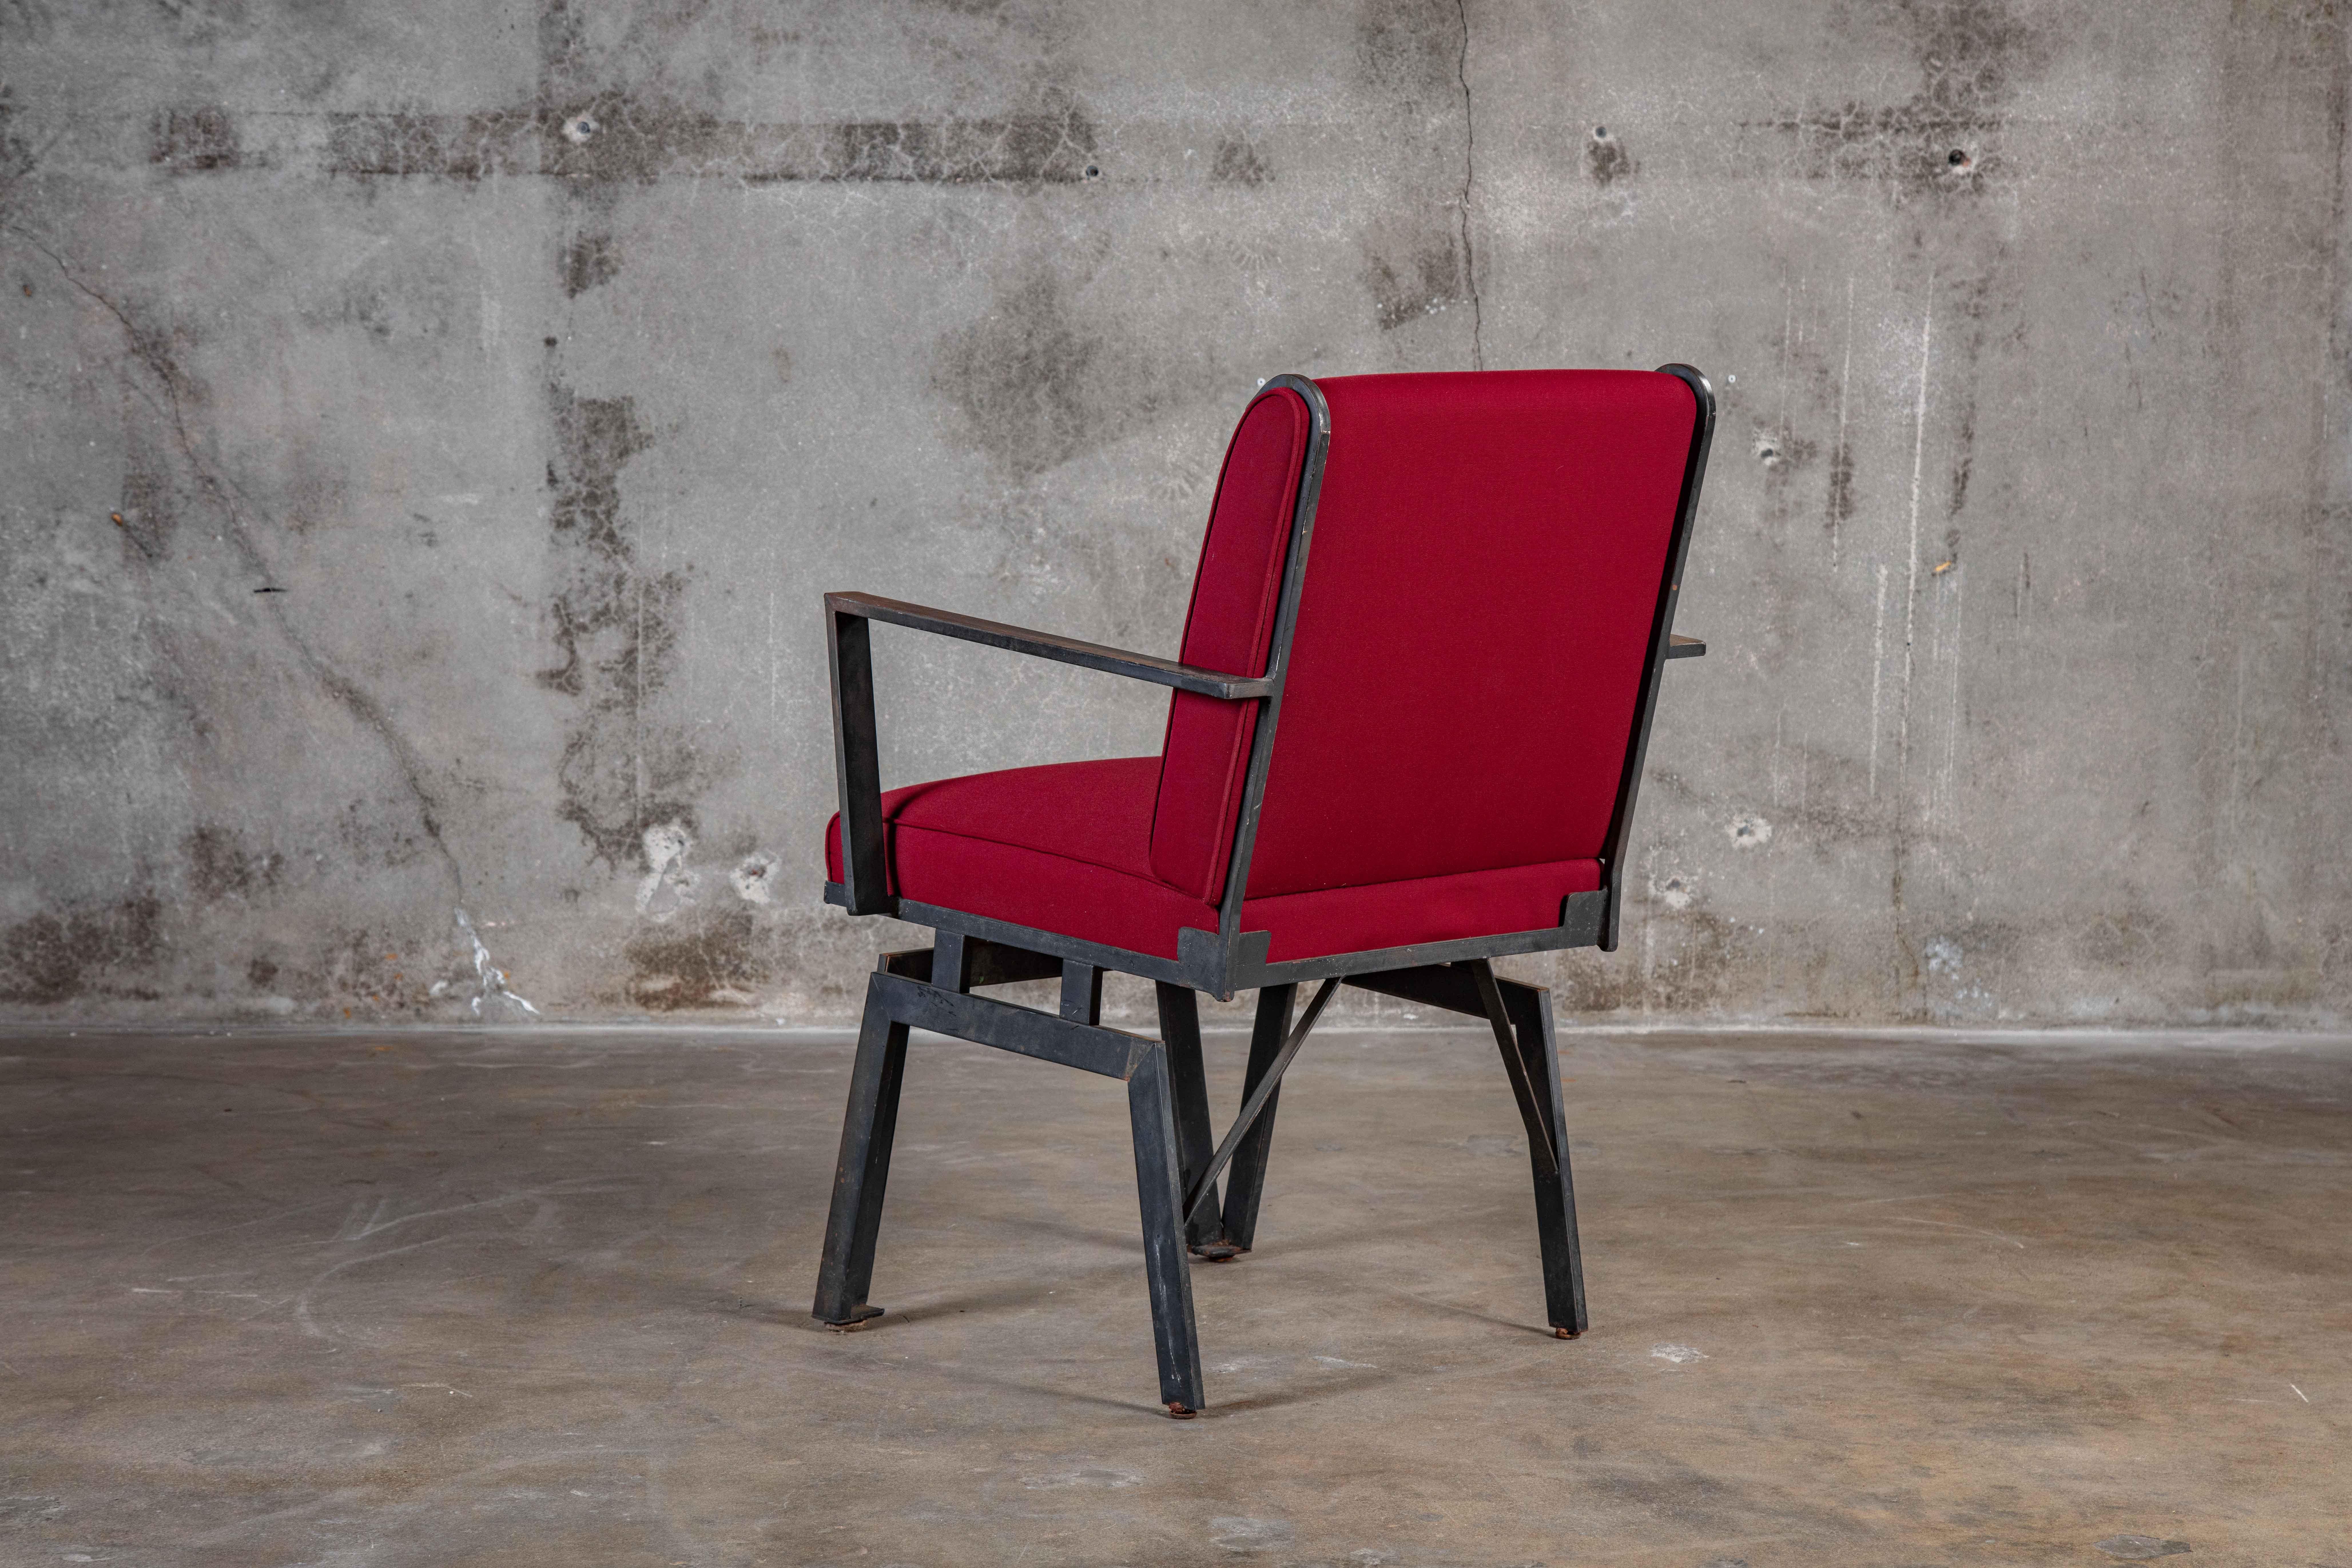 Walter lamb: Pacific iron armchair, 1940s

Measures: Seat 18 3/4